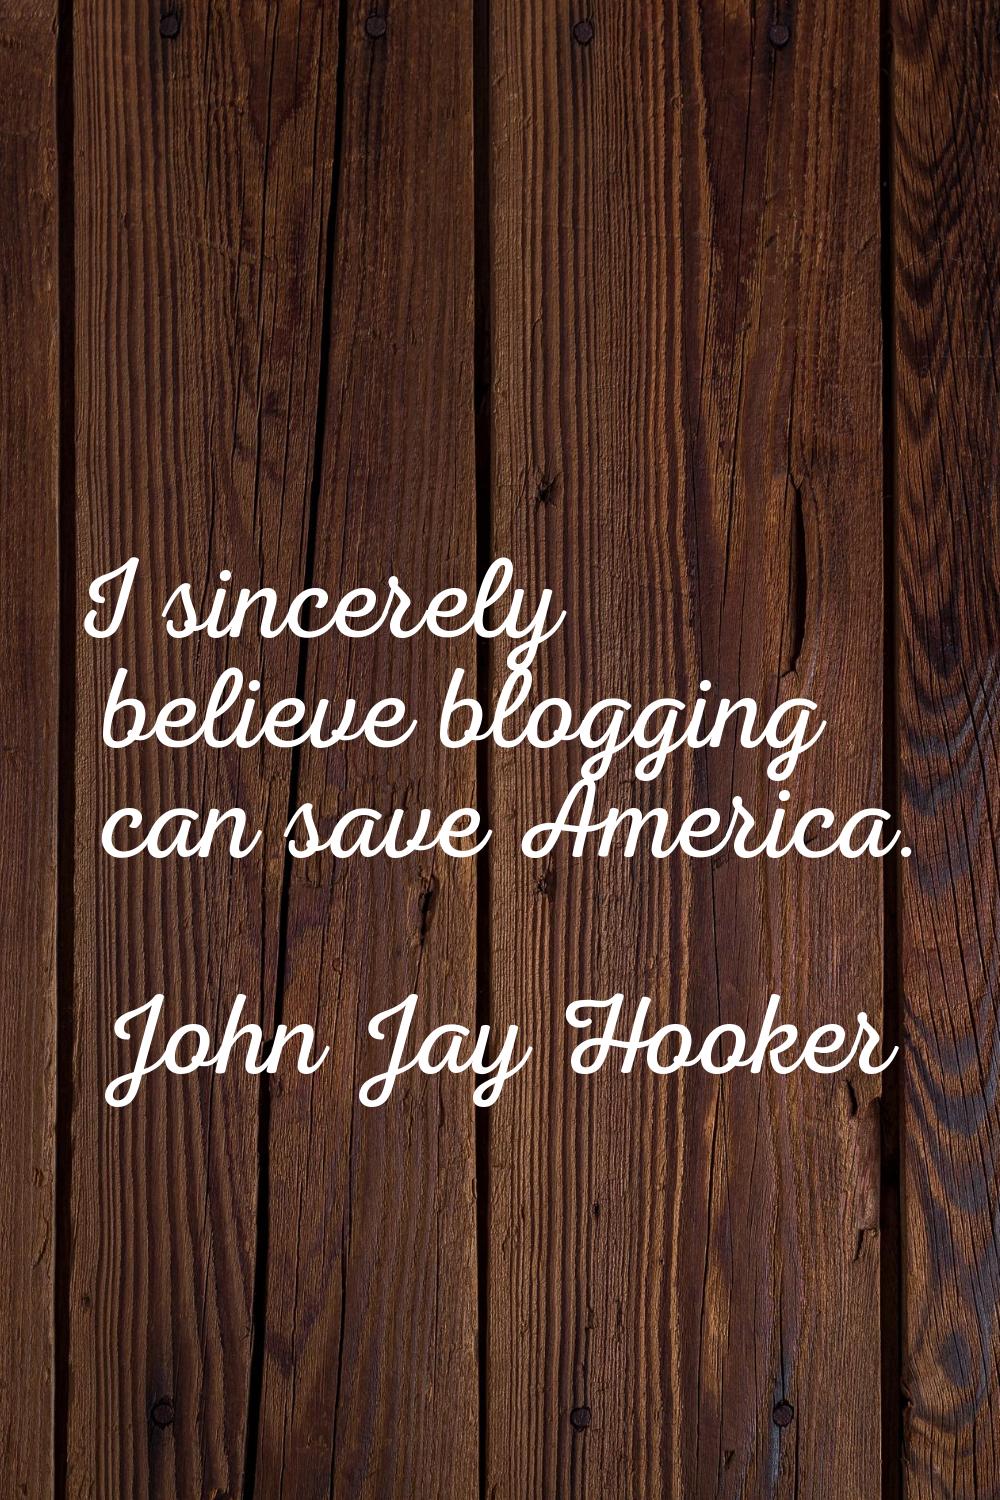 I sincerely believe blogging can save America.